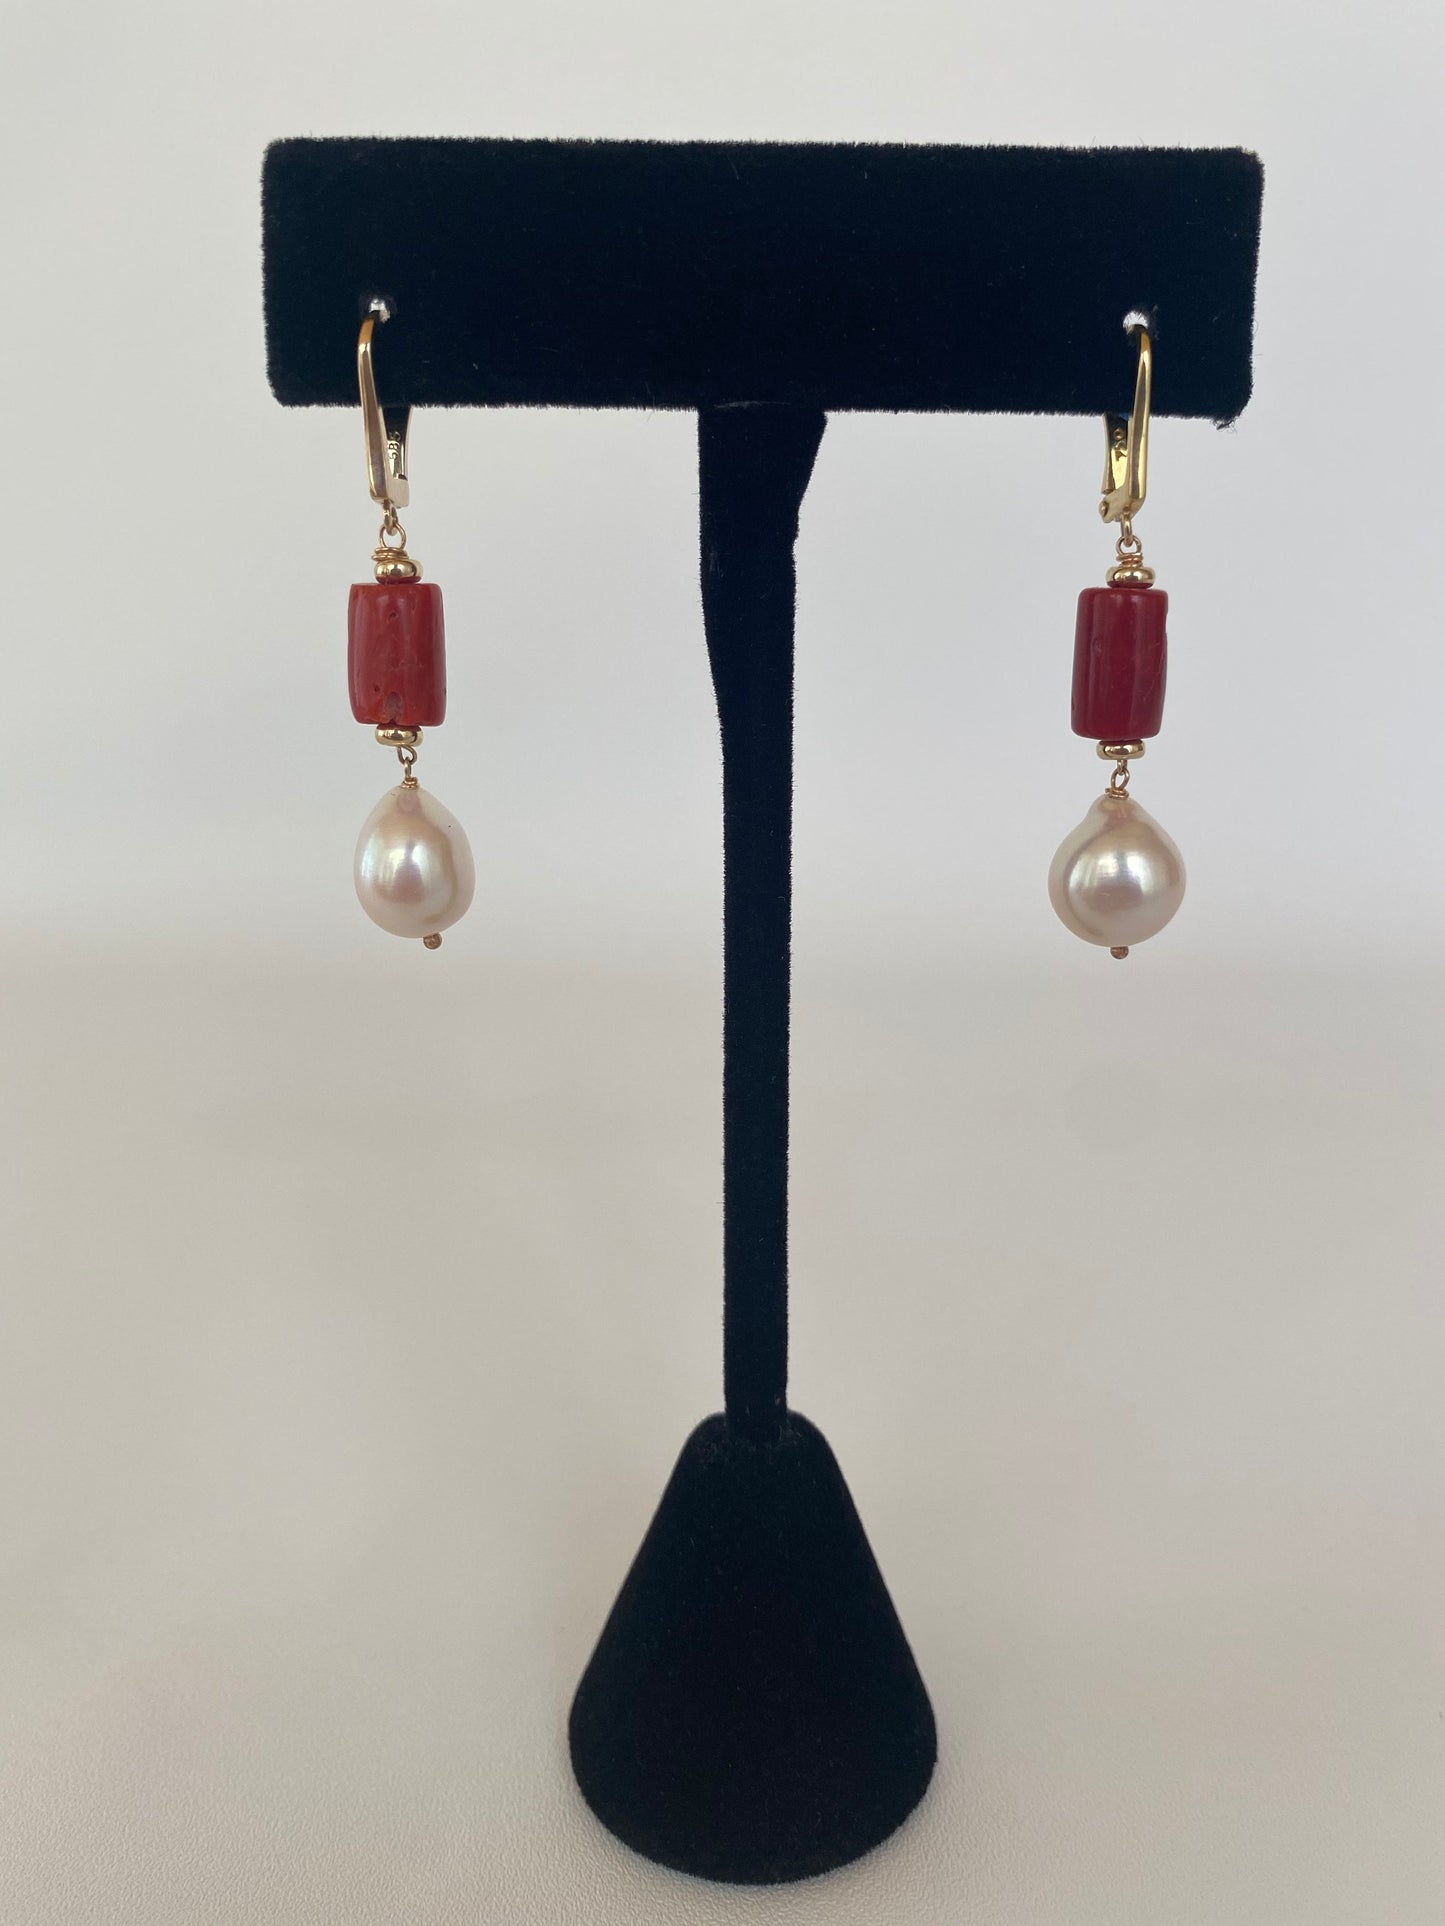 Mediterranean Coral, Pearl and 14K Yellow Gold Lever Back Earrings